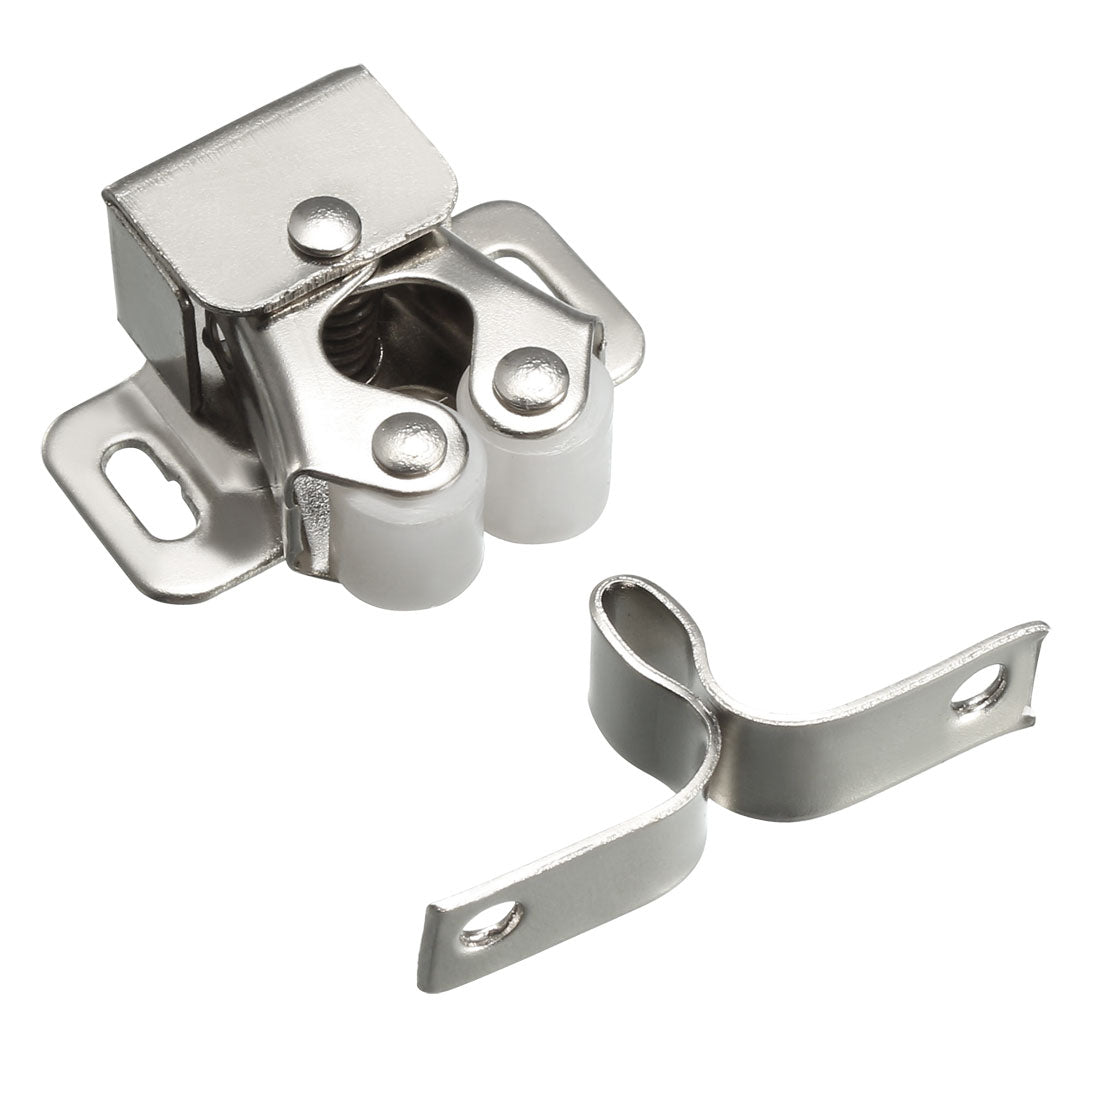 uxcell Uxcell Cabinet Door Double Roller Catch Ball Latch with Prong Hardware, Silver 2pcs